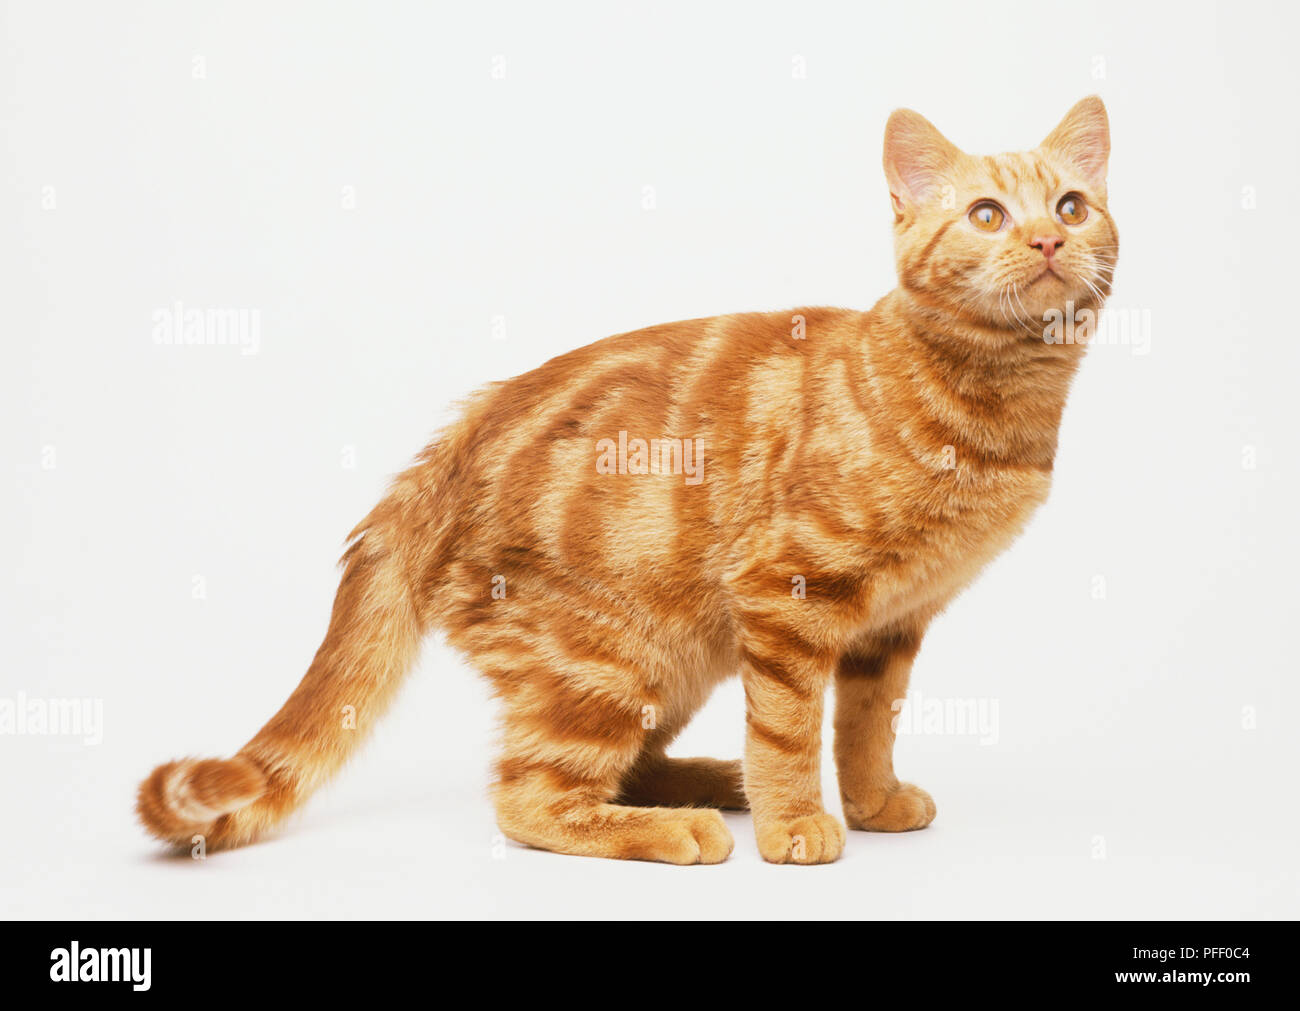 Ginger tabby cat, looking up, side view Banque D'Images